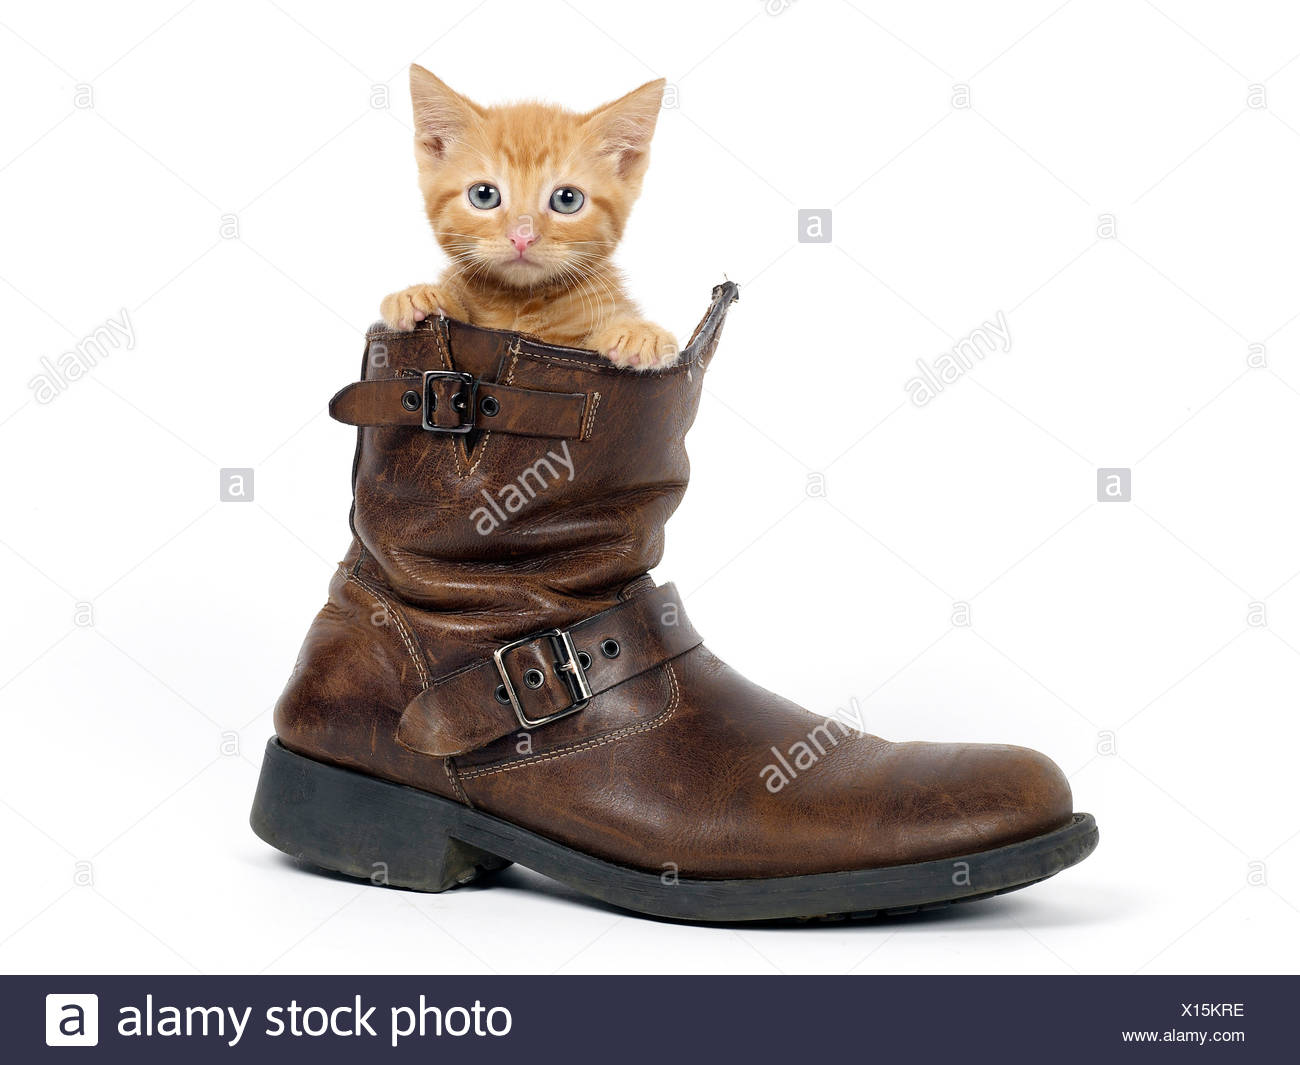 Cute Kitten Boots High Resolution Stock Photography and Images - Alamy